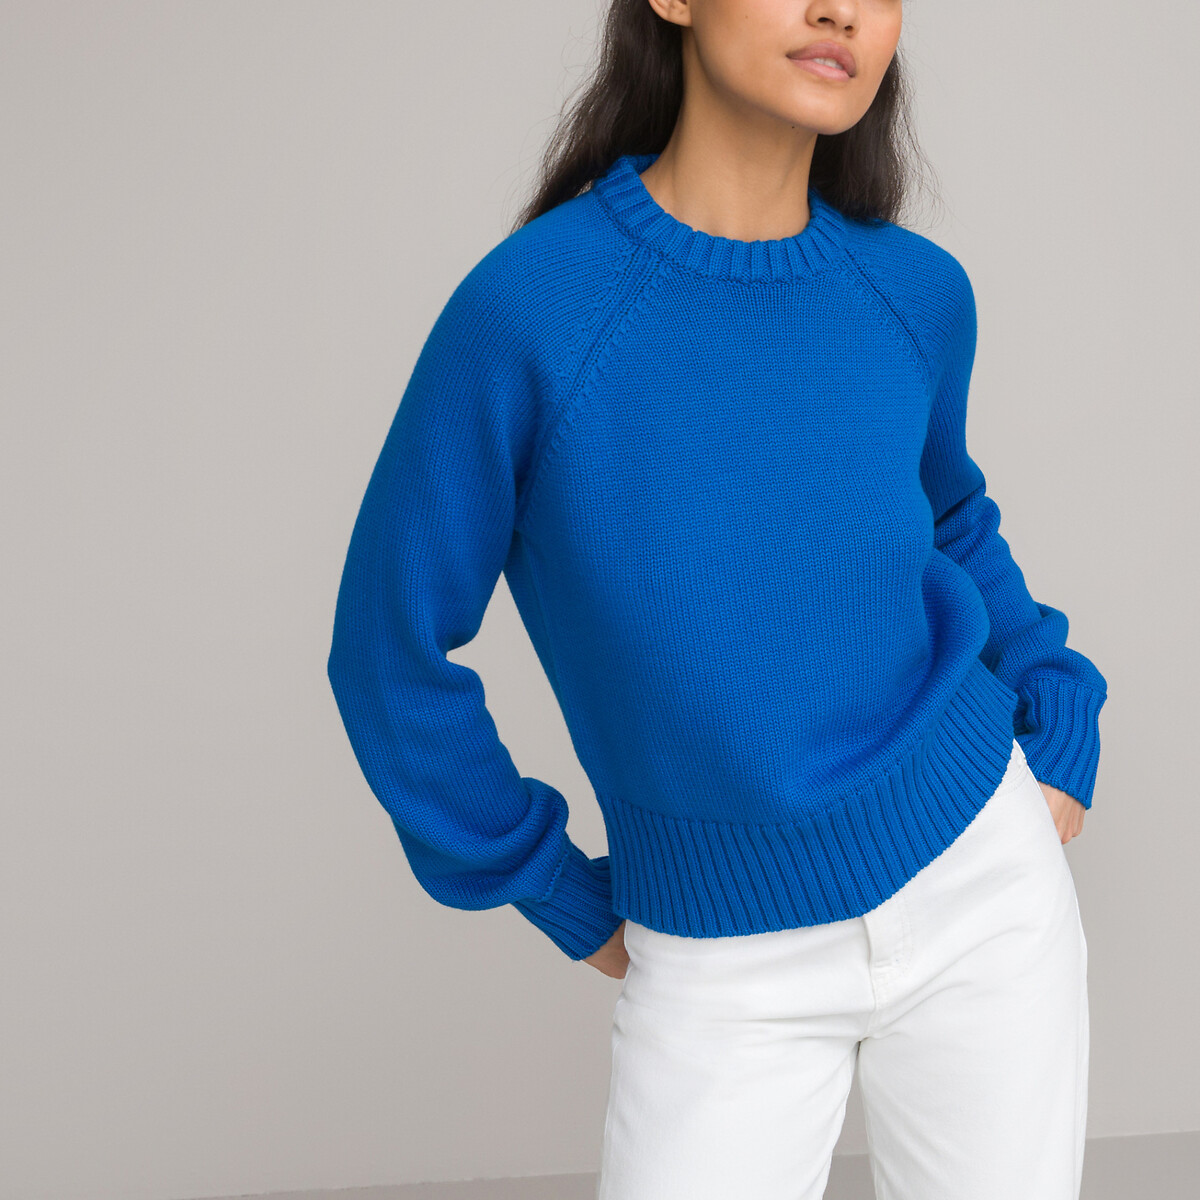 Cotton Mix Jumper in Chunky Knit with Crew Neck